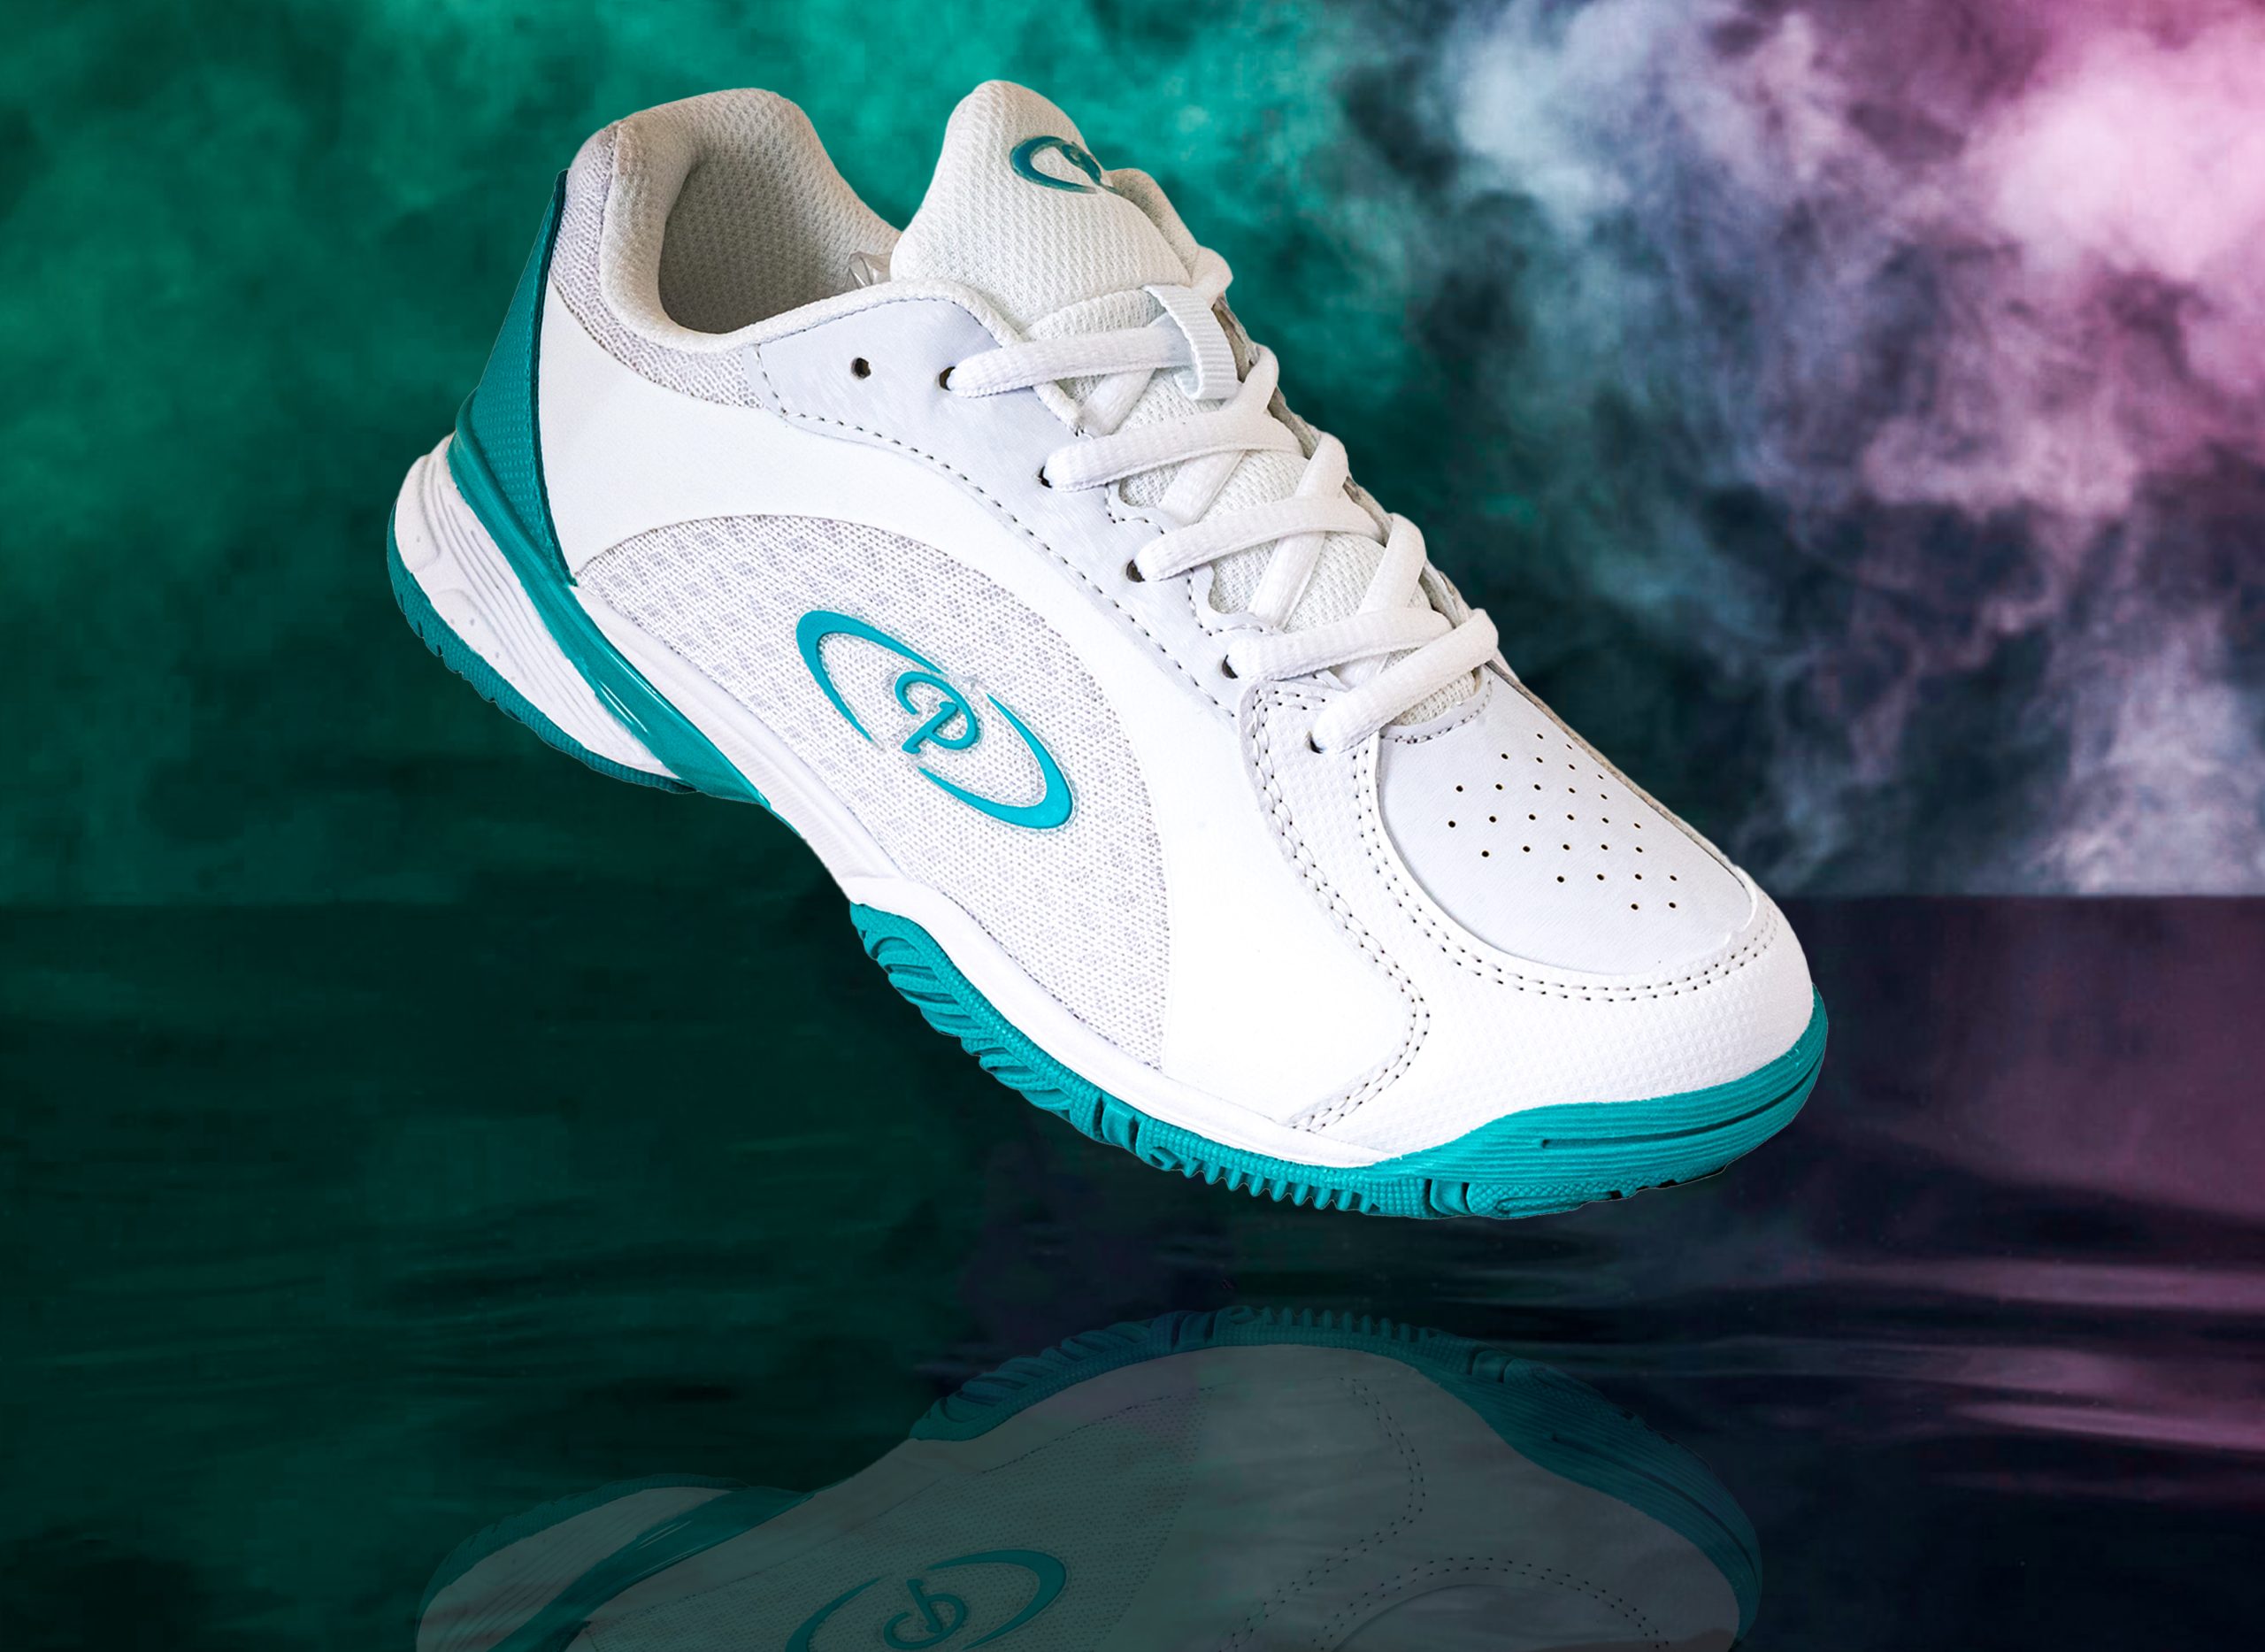 You are currently viewing Premier Ladies Synergy Netball Shoes WHITE/GREEN